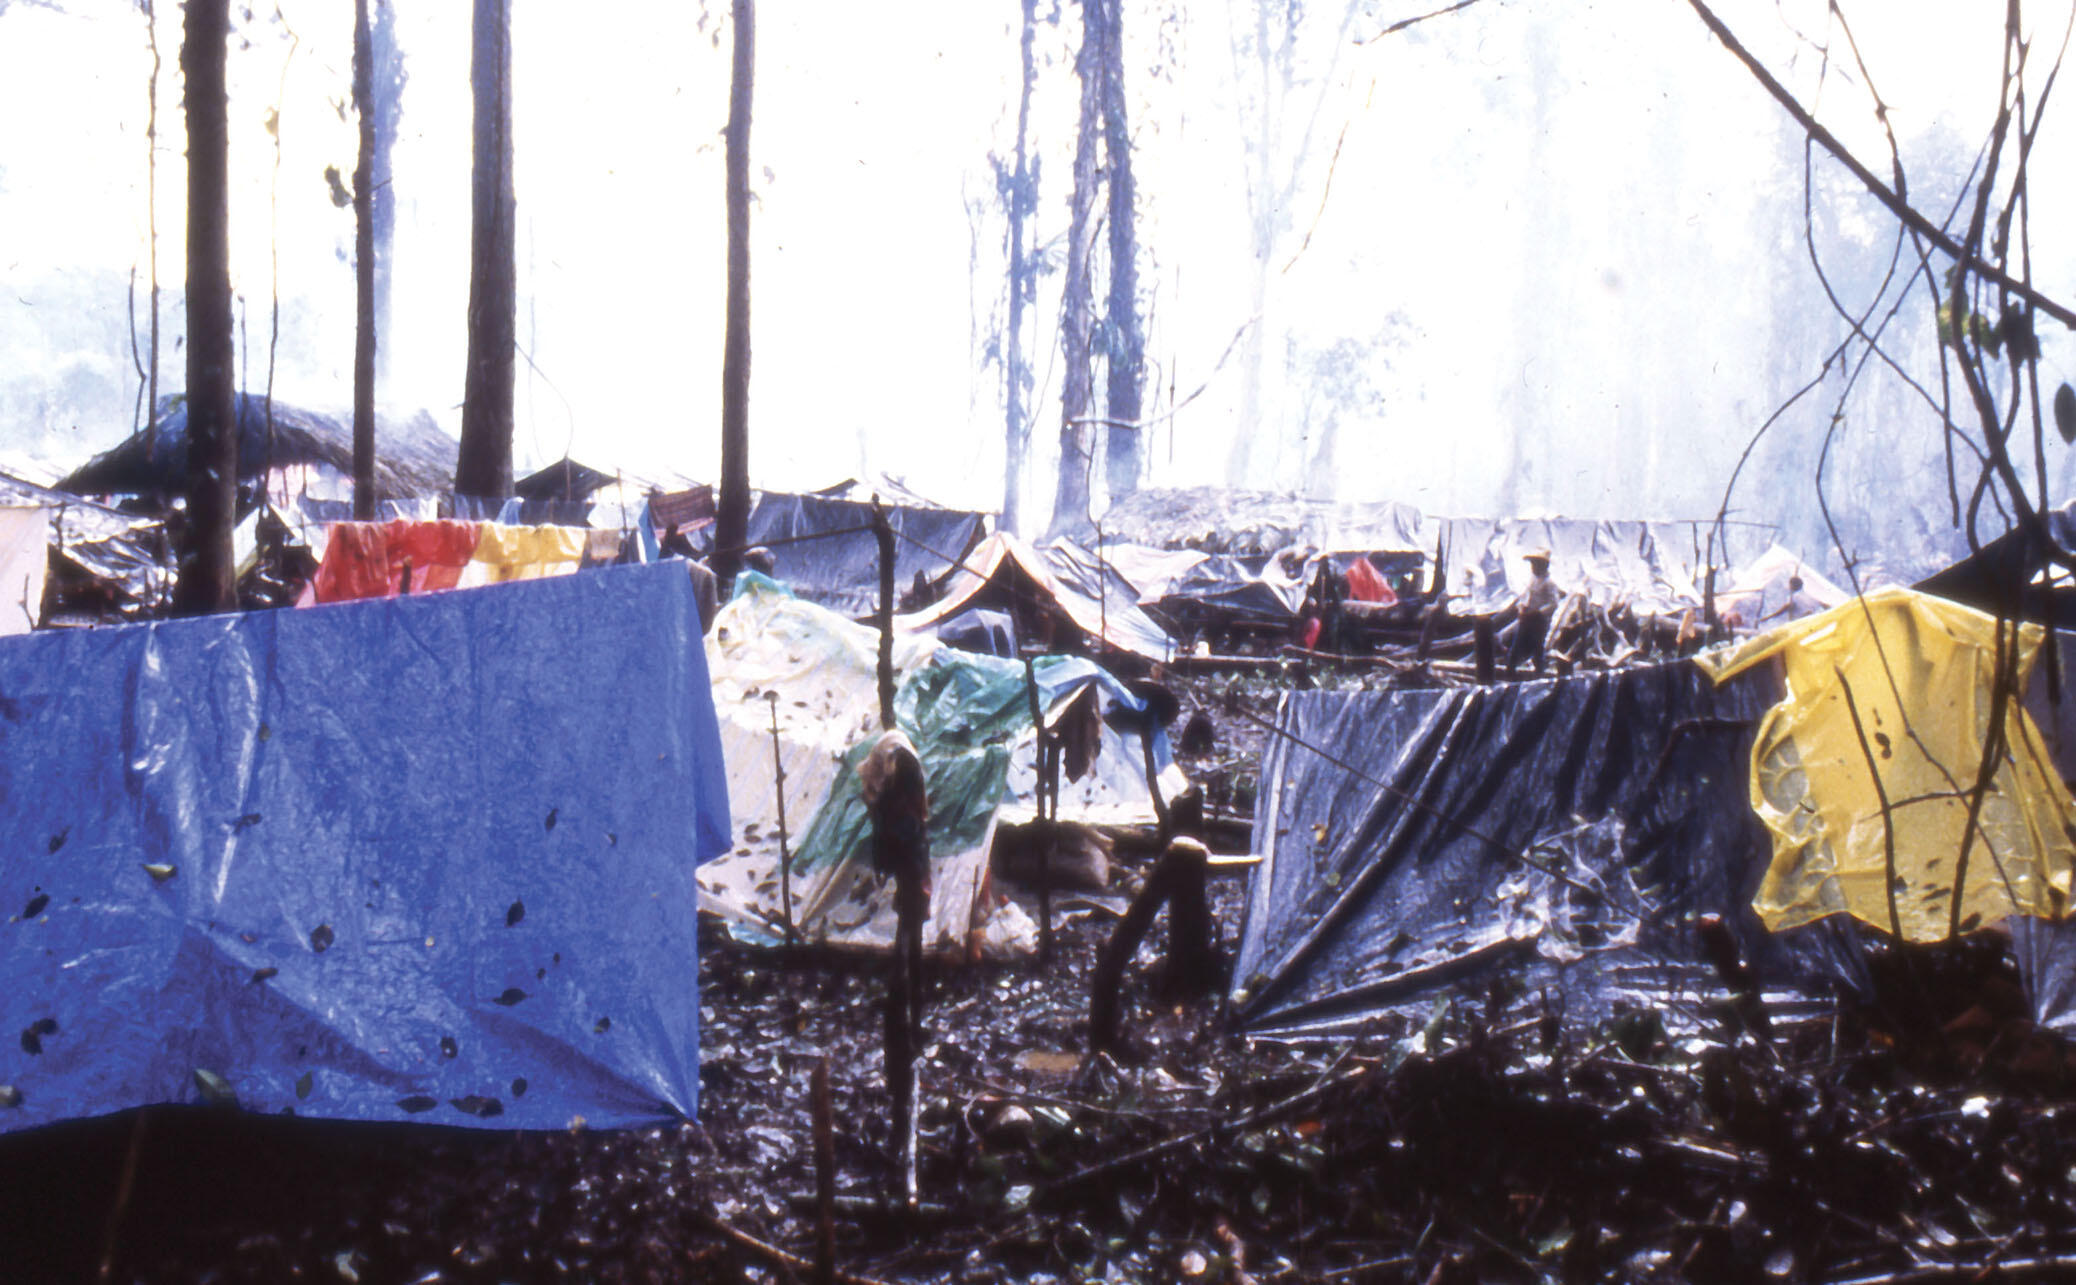 Lean-tos and tarps in the mud form the housing at Rancho Puerto Rico Camp, Lacandón rainforest, Chiapas, Mexico, November 1982. (Photo courtesy of Beatriz Manz.)